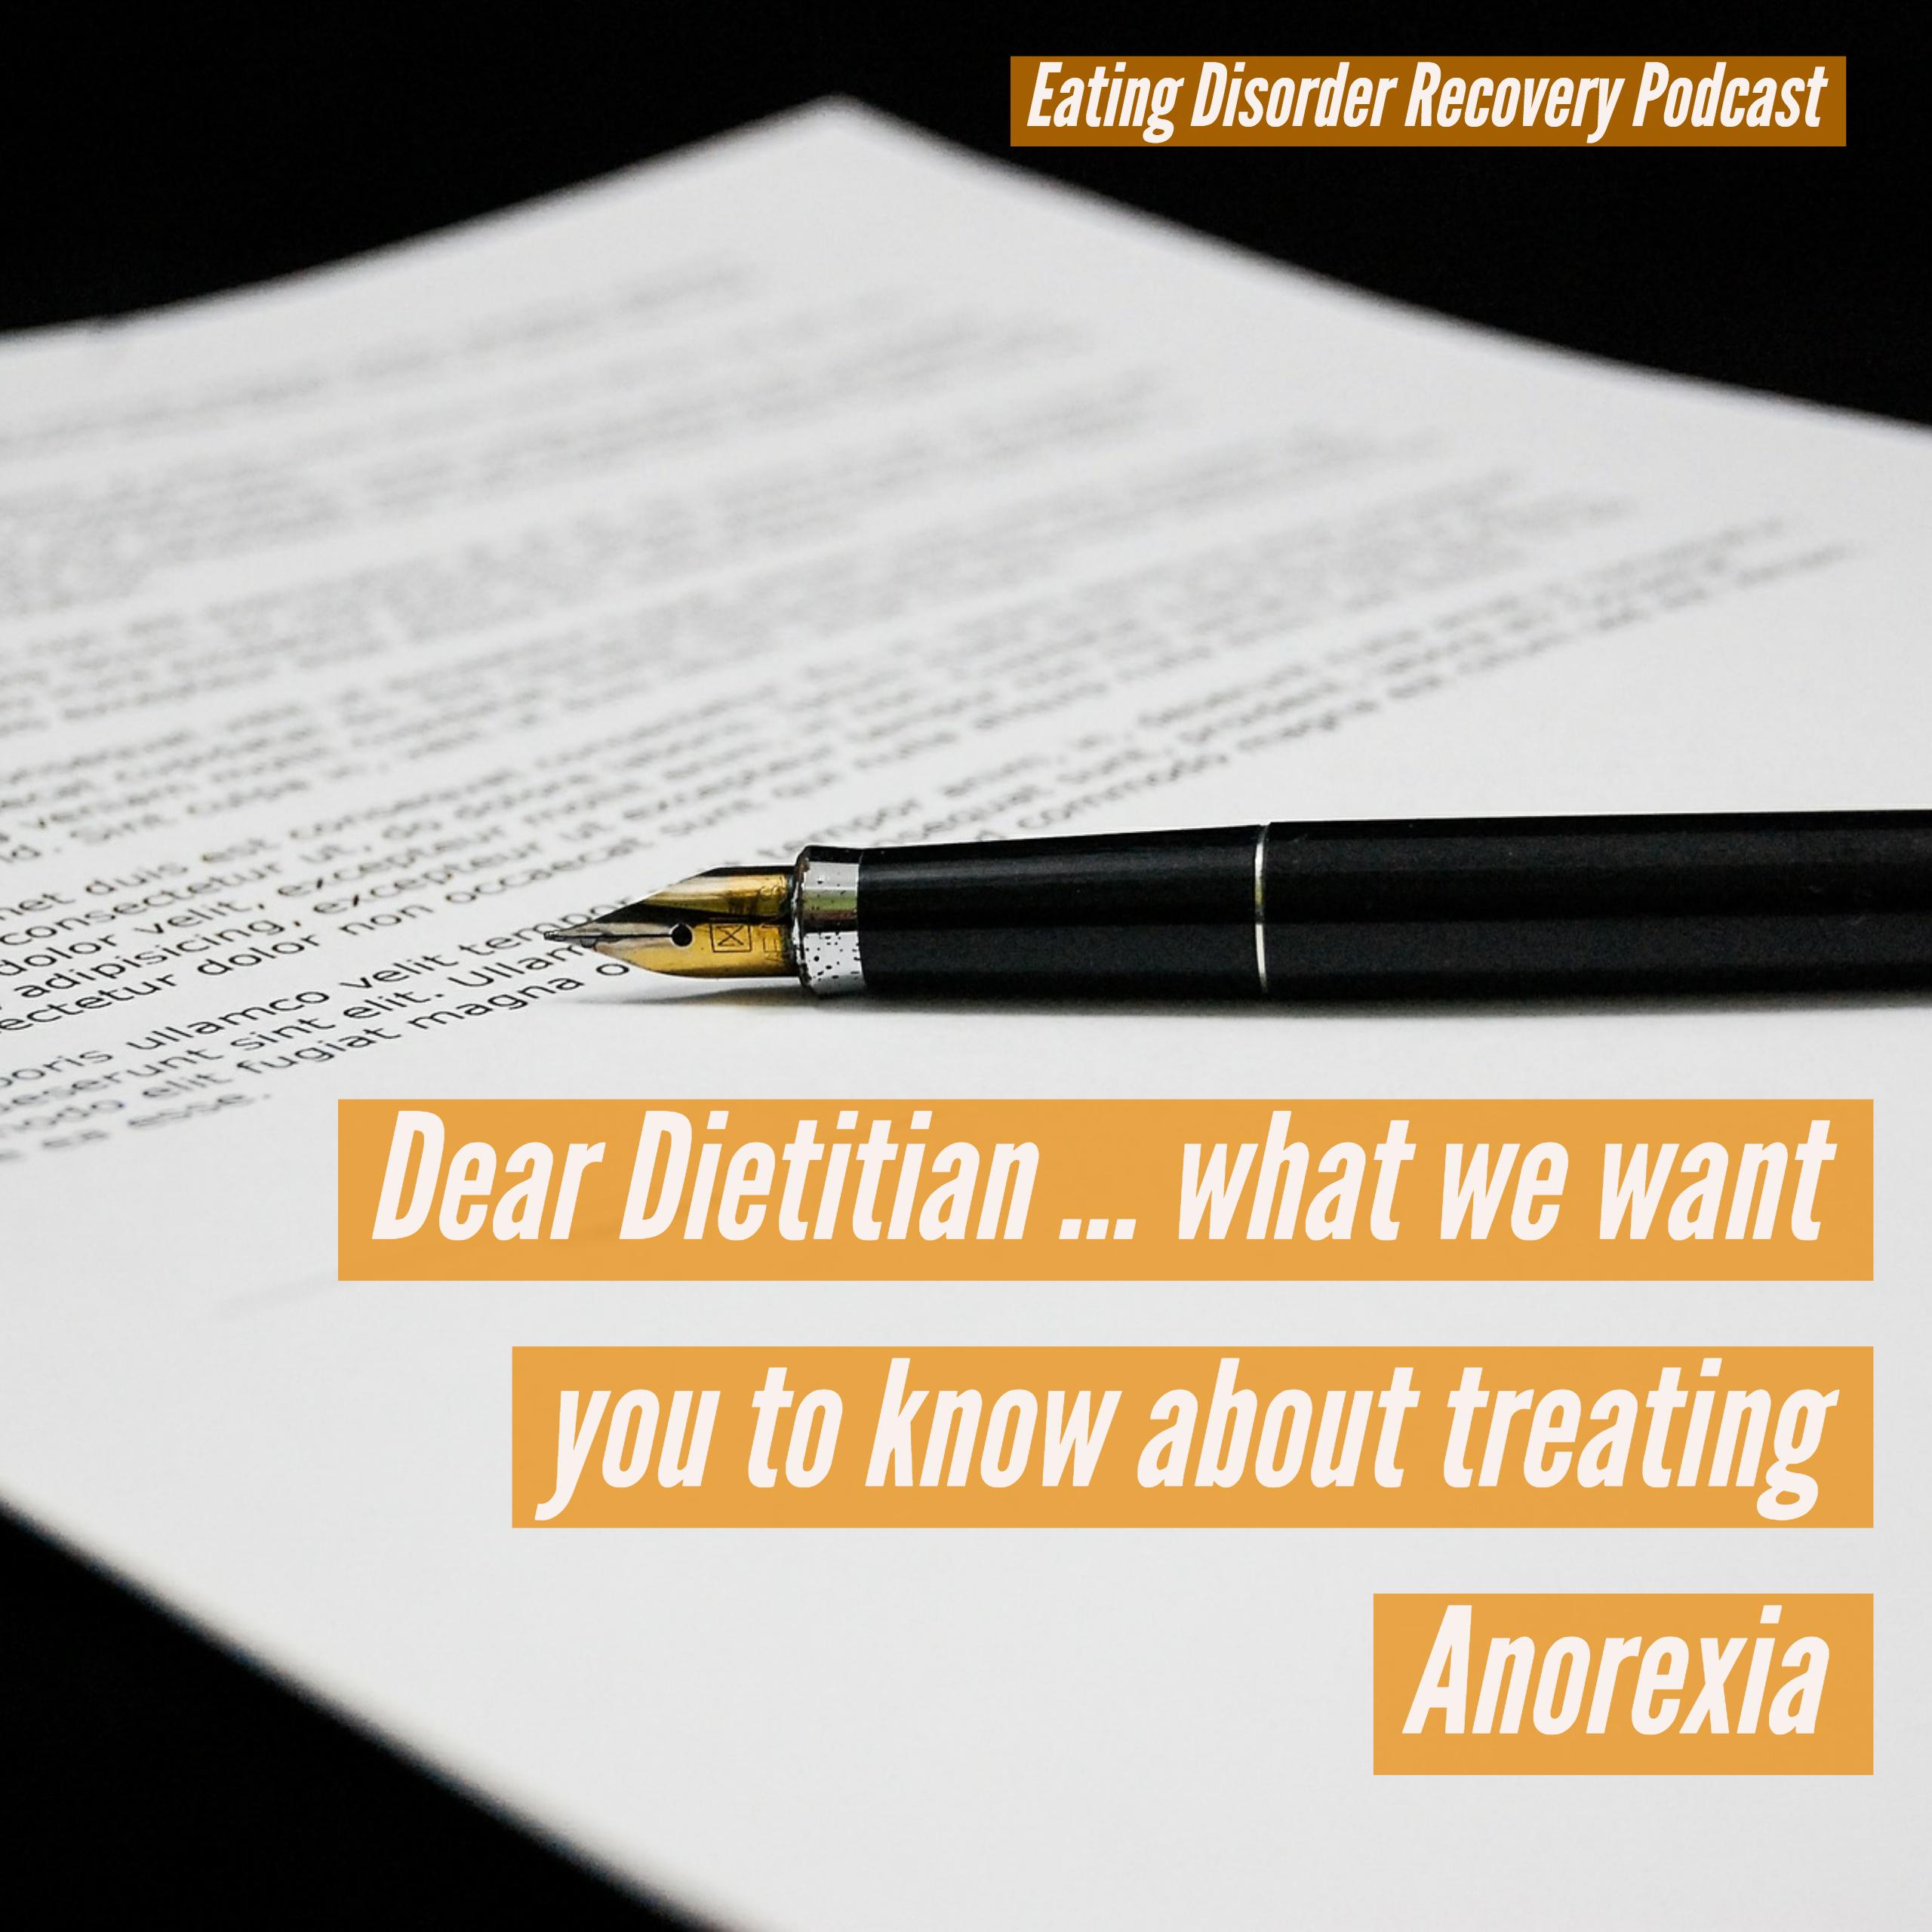 Dear Dietitian ... what we want you to know about treating Anorexia